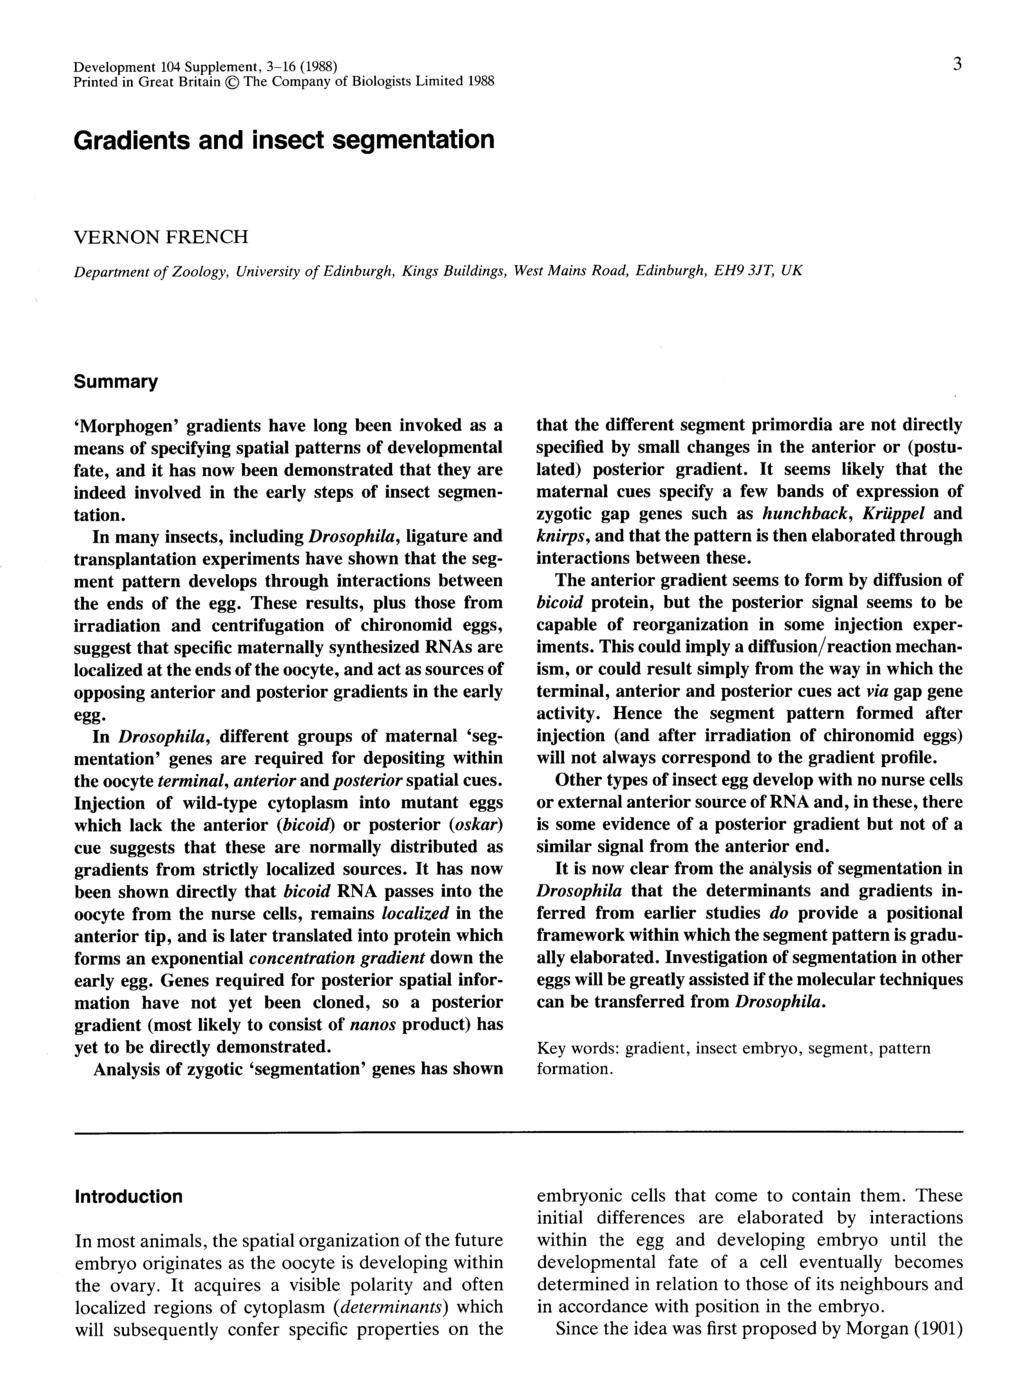 Development 104 Supplement, 3-1,6 (1988) Printed in Great Britain @ The Company of Biologists Limited 1988 Gradients and insect segmentation VERNON FRENCH Department of Zoology, University of